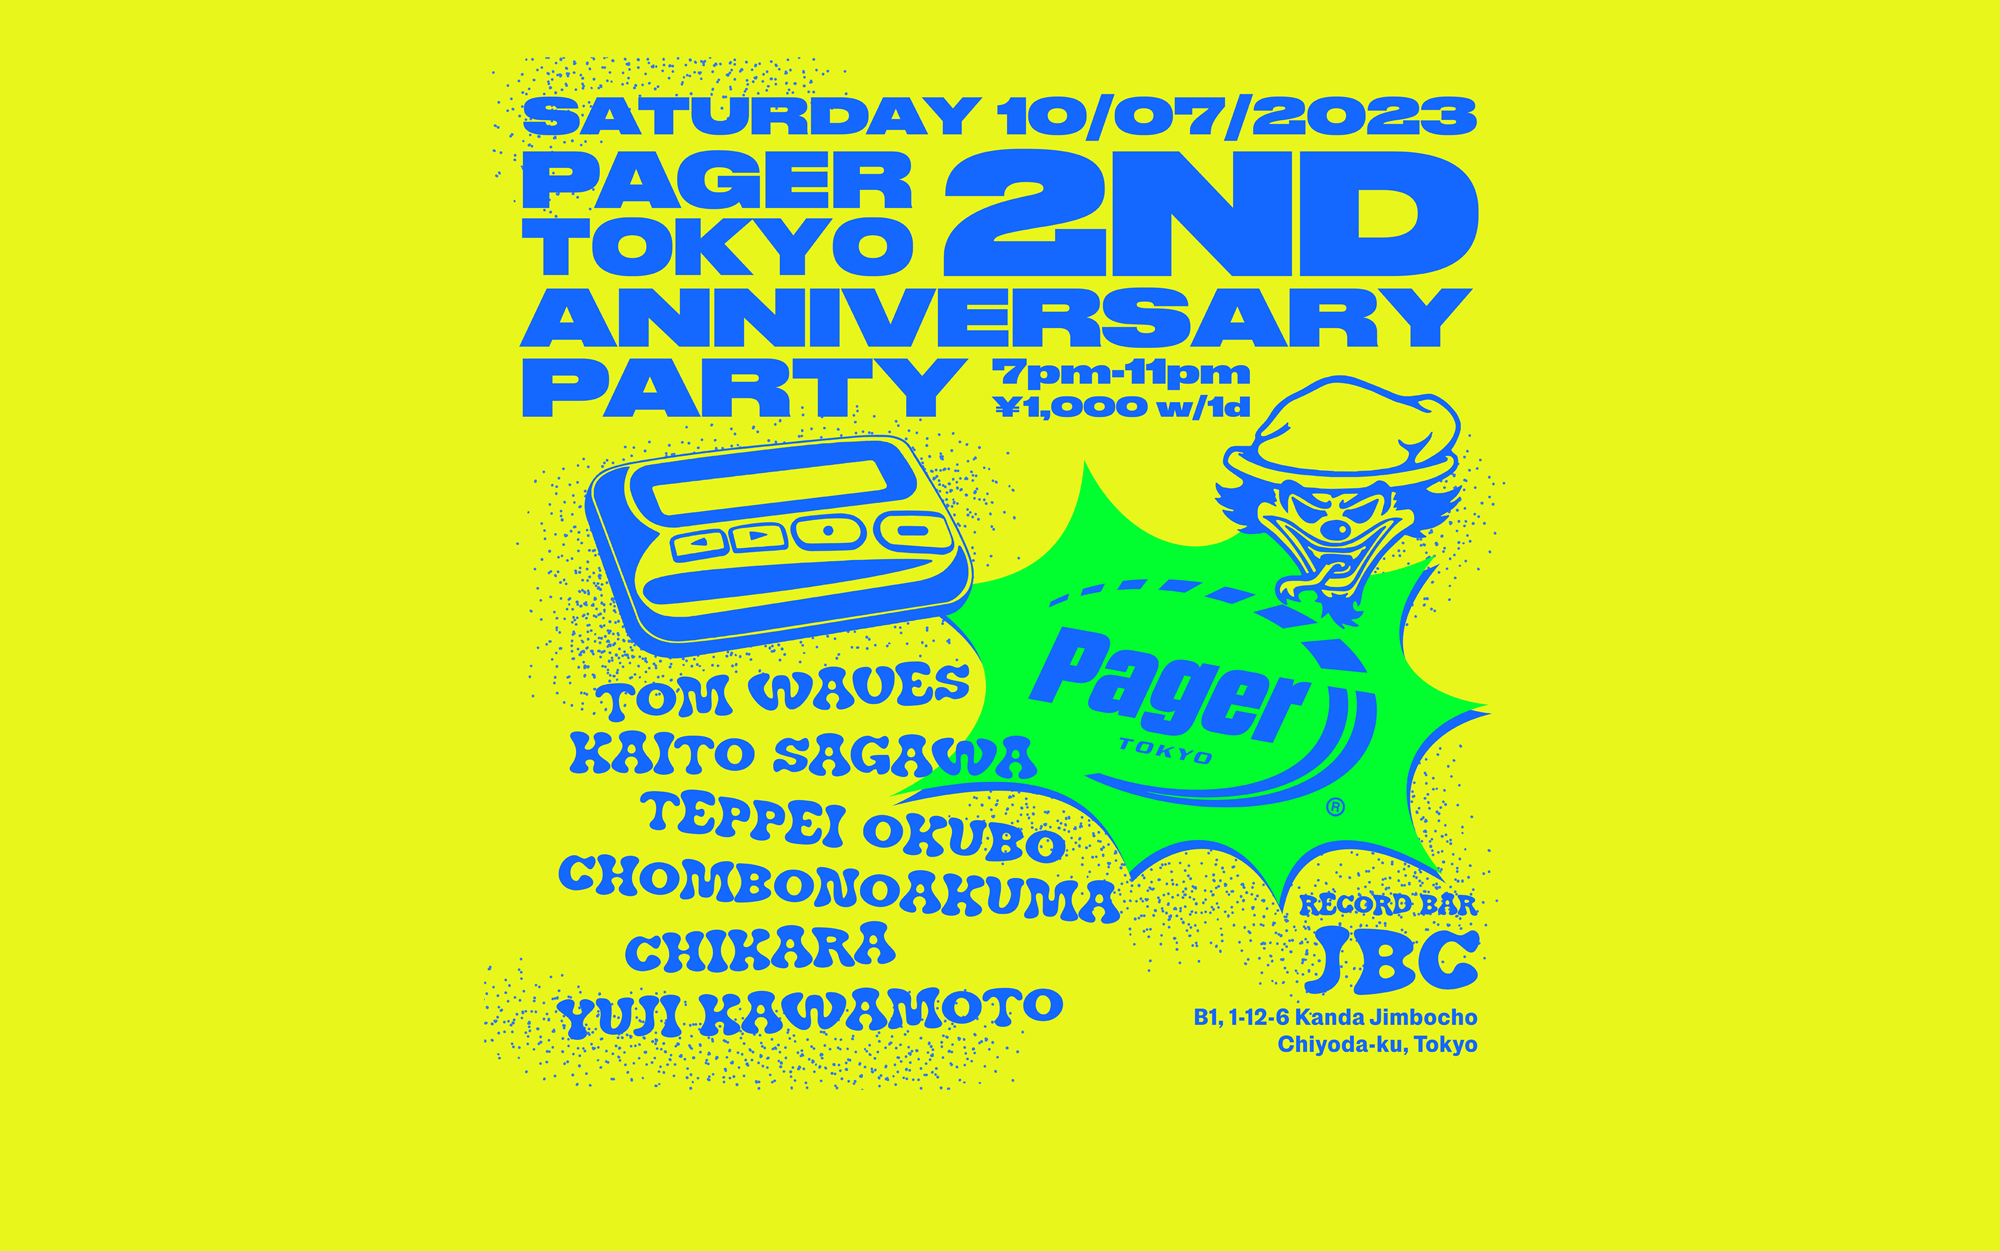 PAGER TOKYO 2ND ANNIVERSARY PARTY